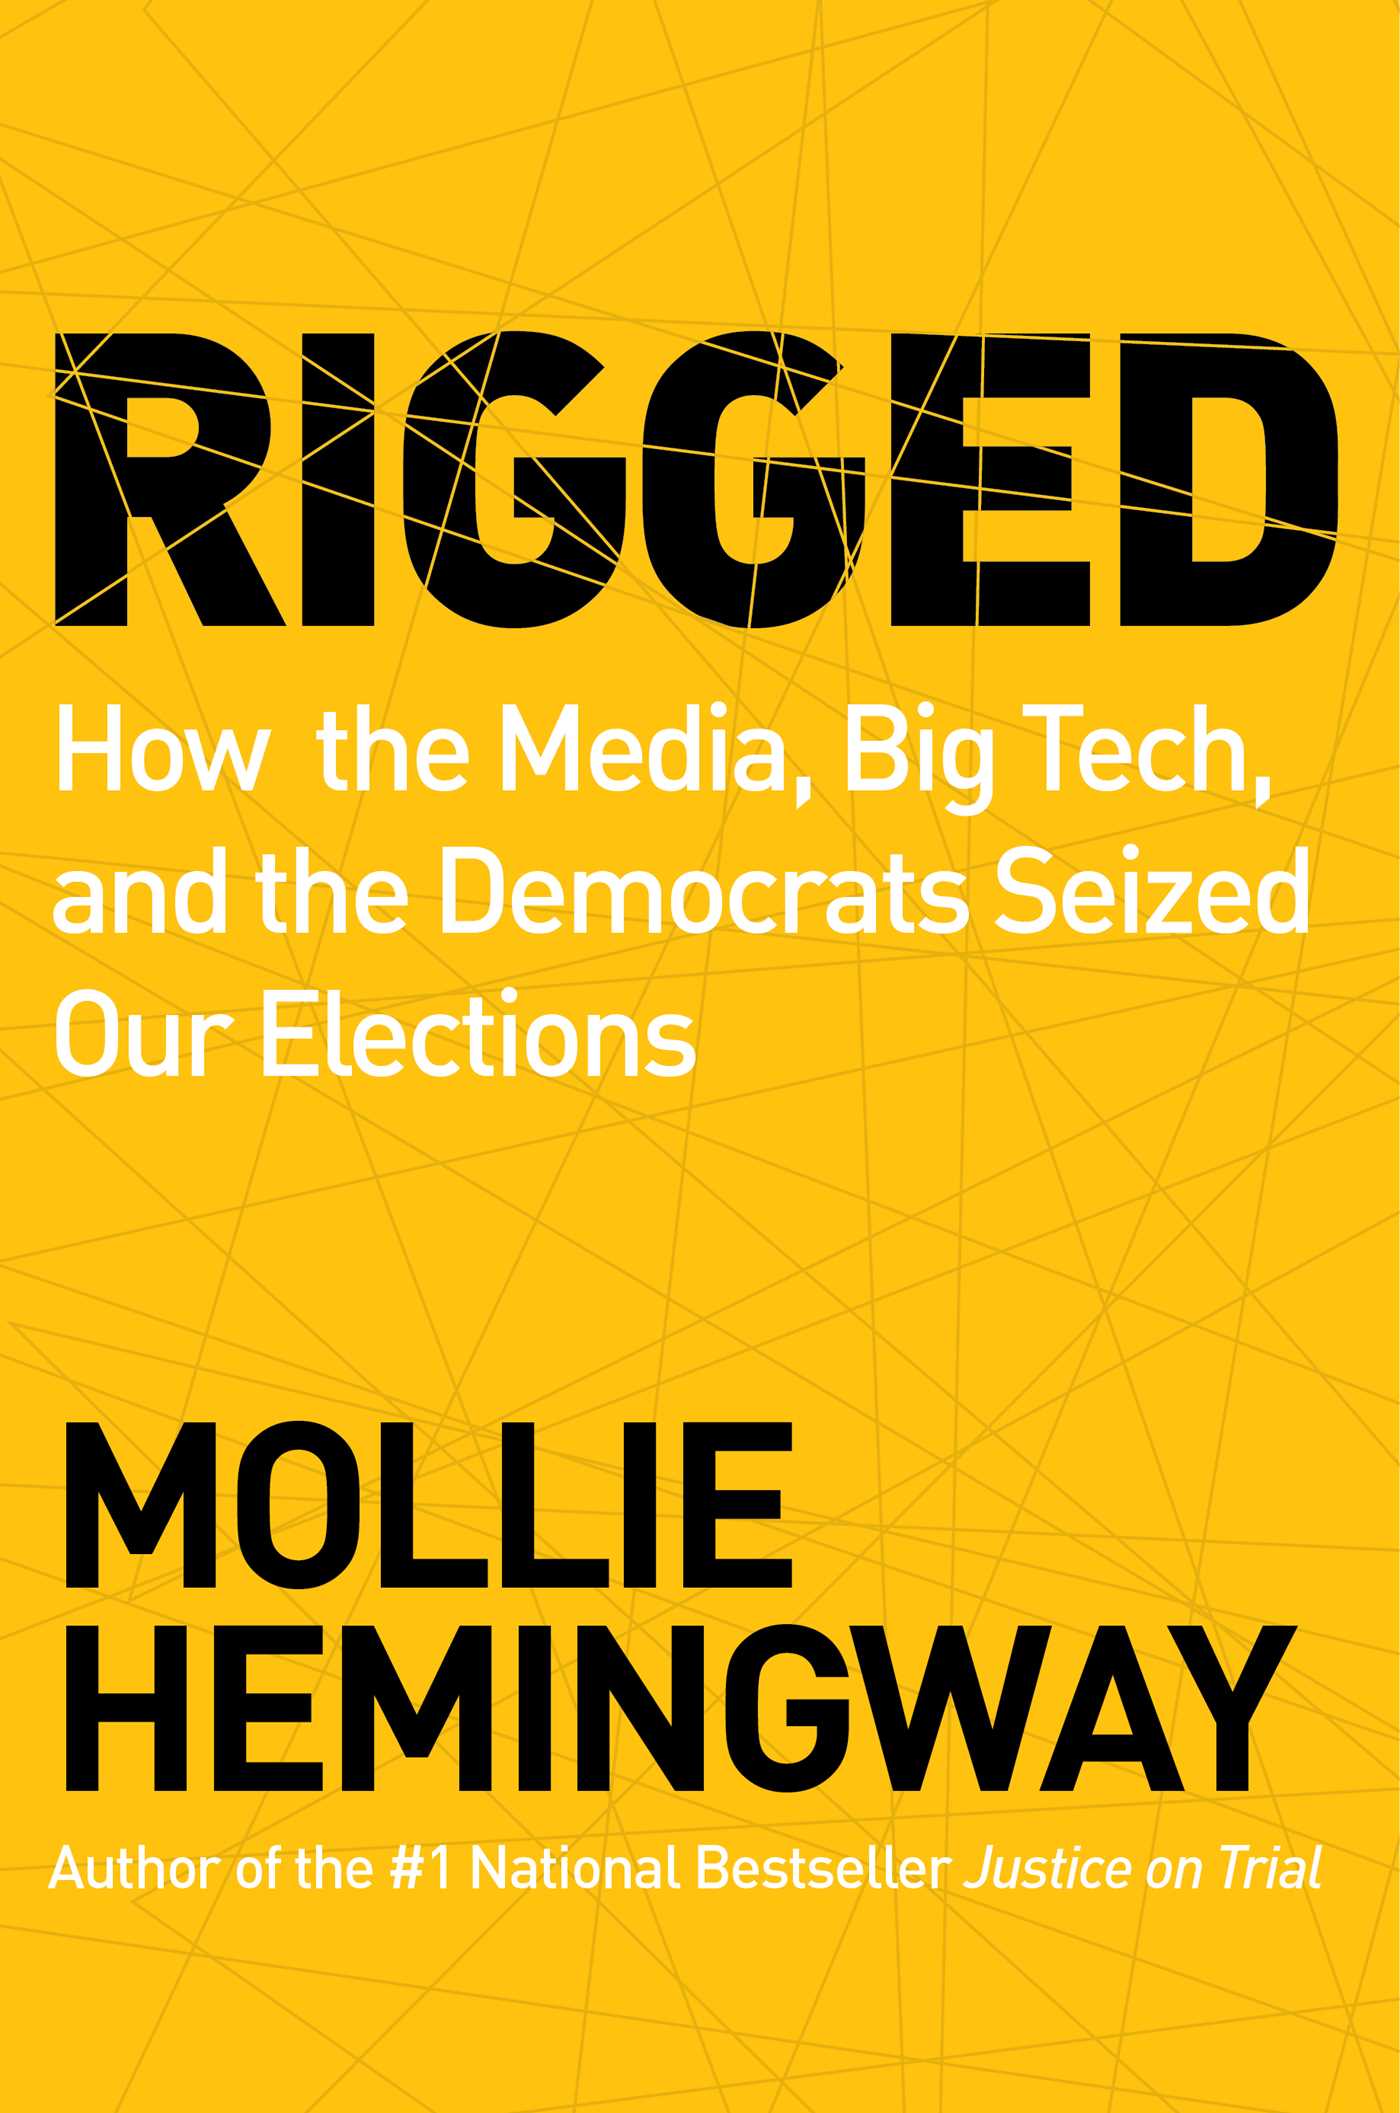 Rigged : How the Media, Big Tech, and the Democrats Seized Our Elections (Hardcover) - image 1 of 1